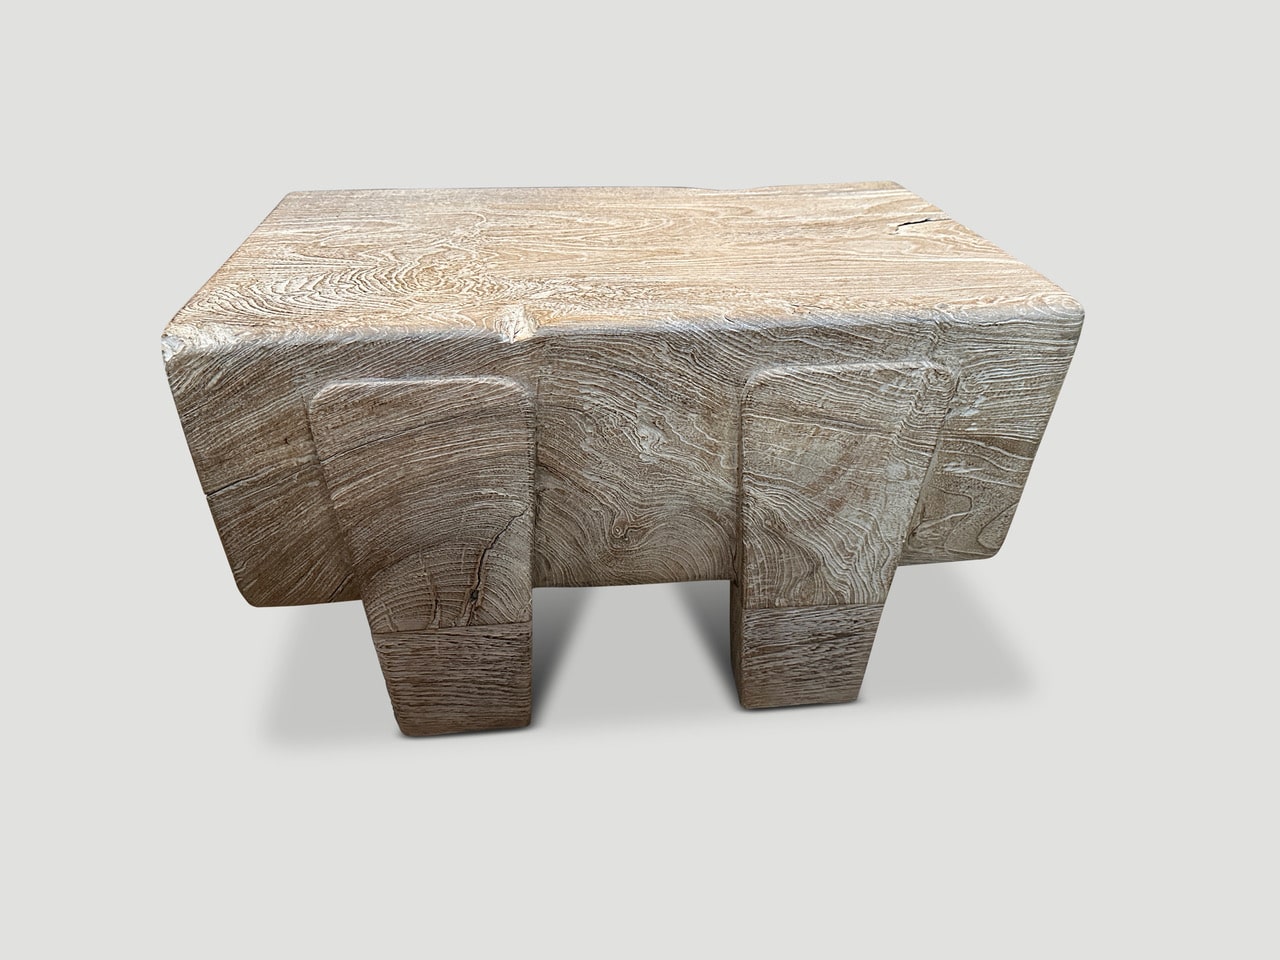 wood coffee table side table or bench